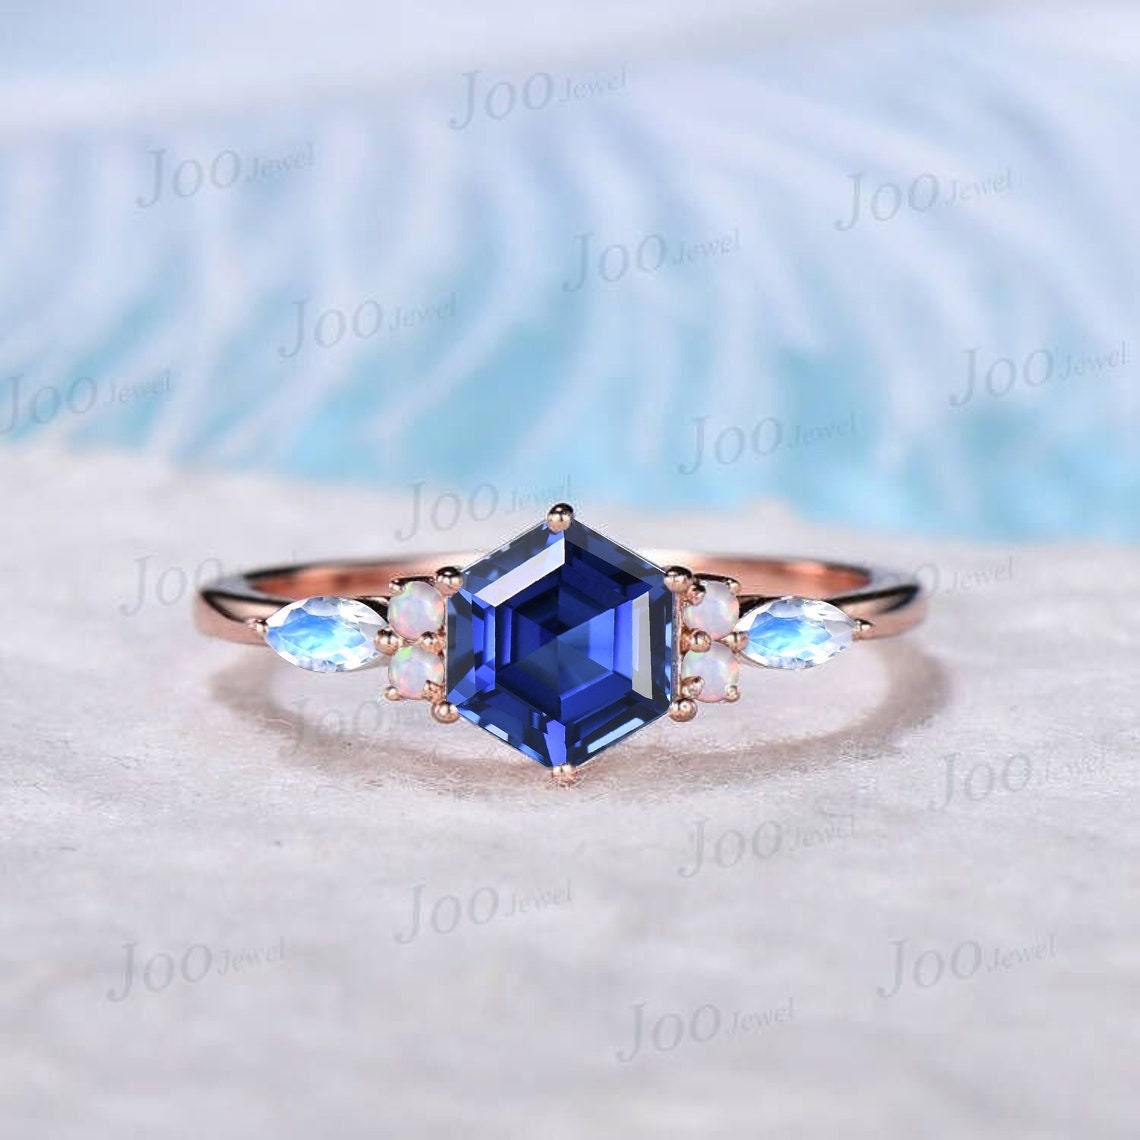 Sterling Silver 1ct Hexagon Cut Blue Sapphire Engagement Rings Vintage Blue Moonstone Opal Wedding Ring September Birthstone Birthday Gifts